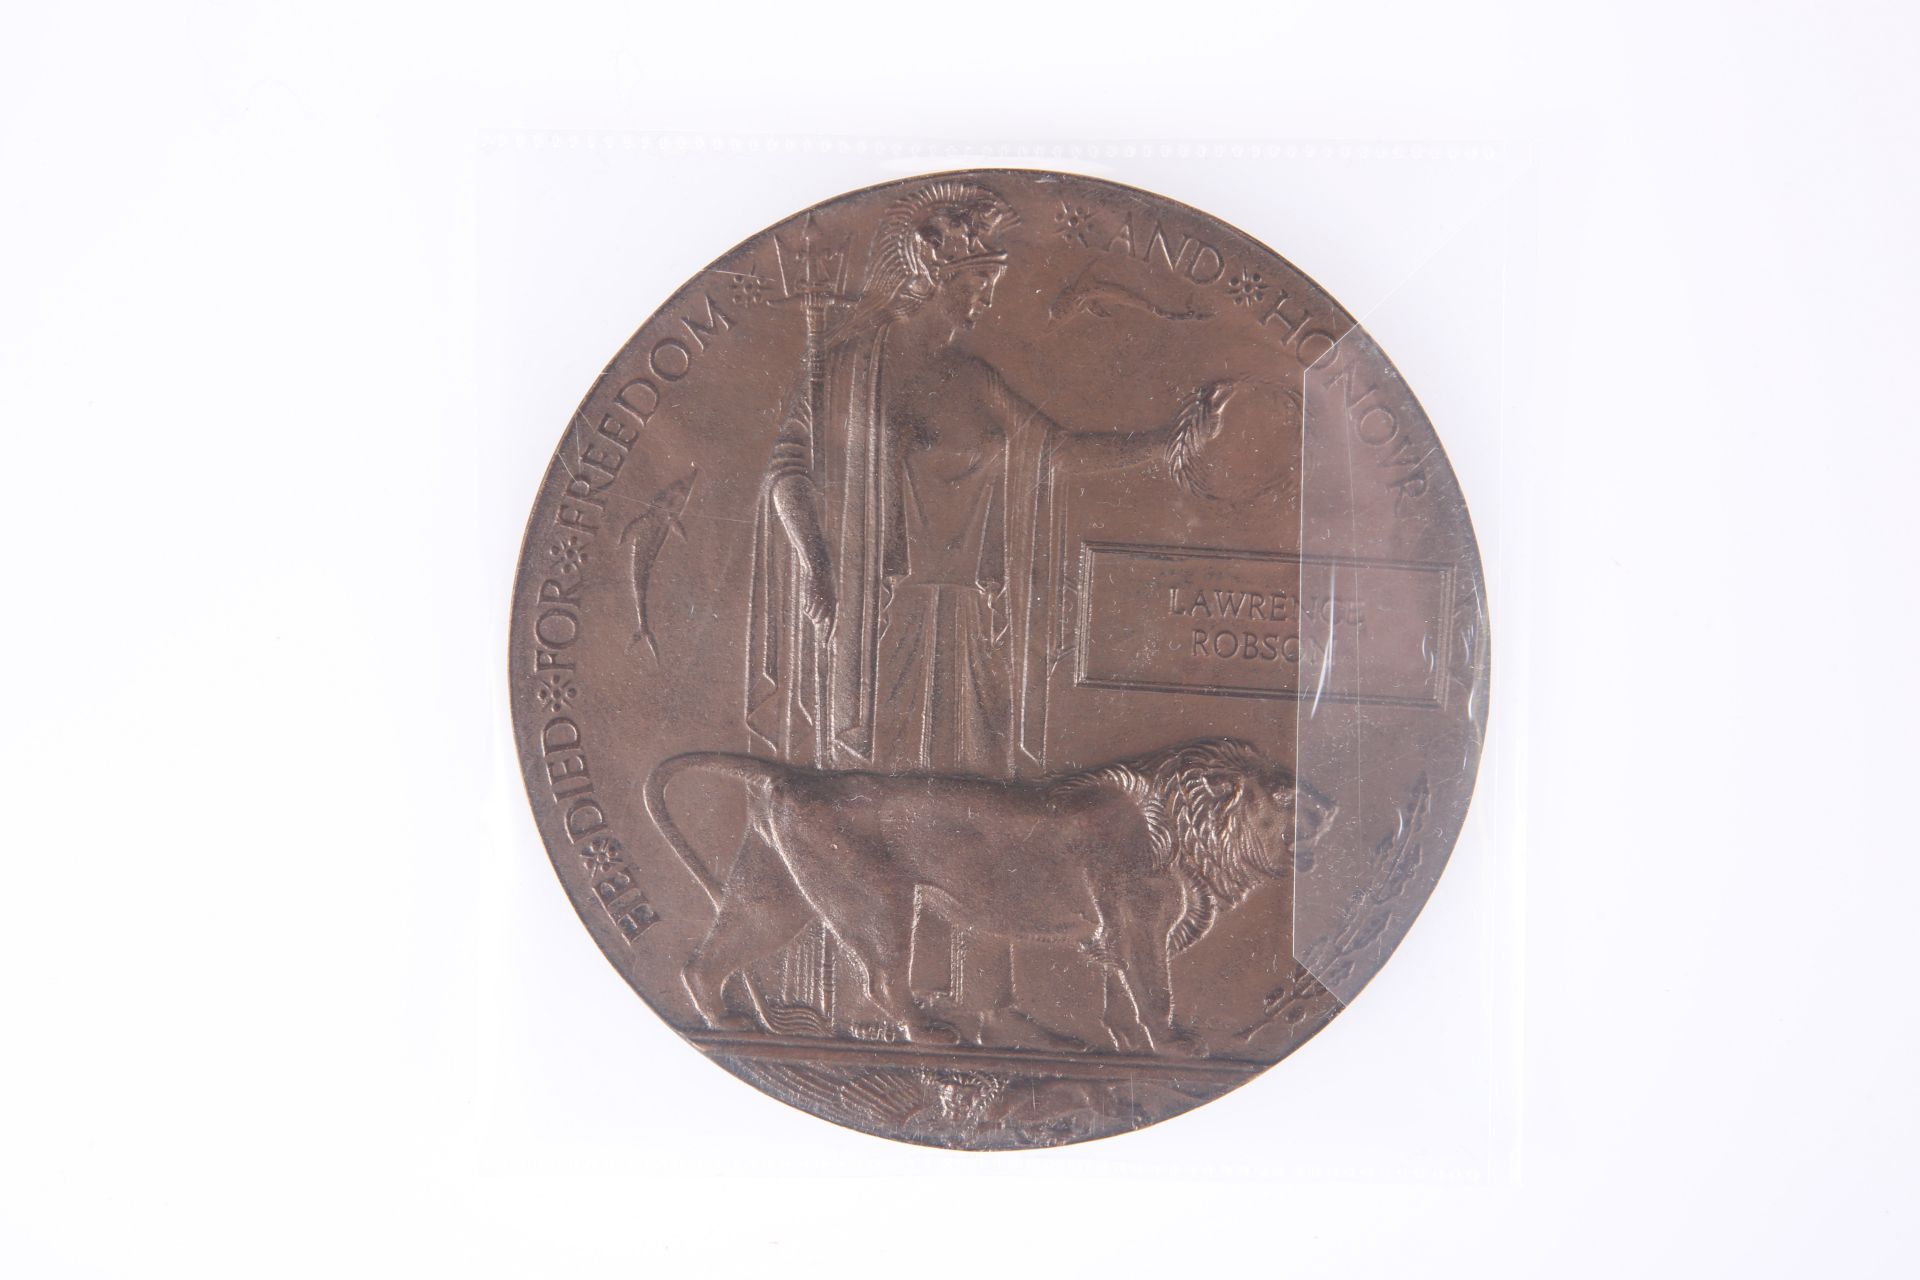 A WWI DEATH PLAQUE, 28944 Pte. Lawrence Robson